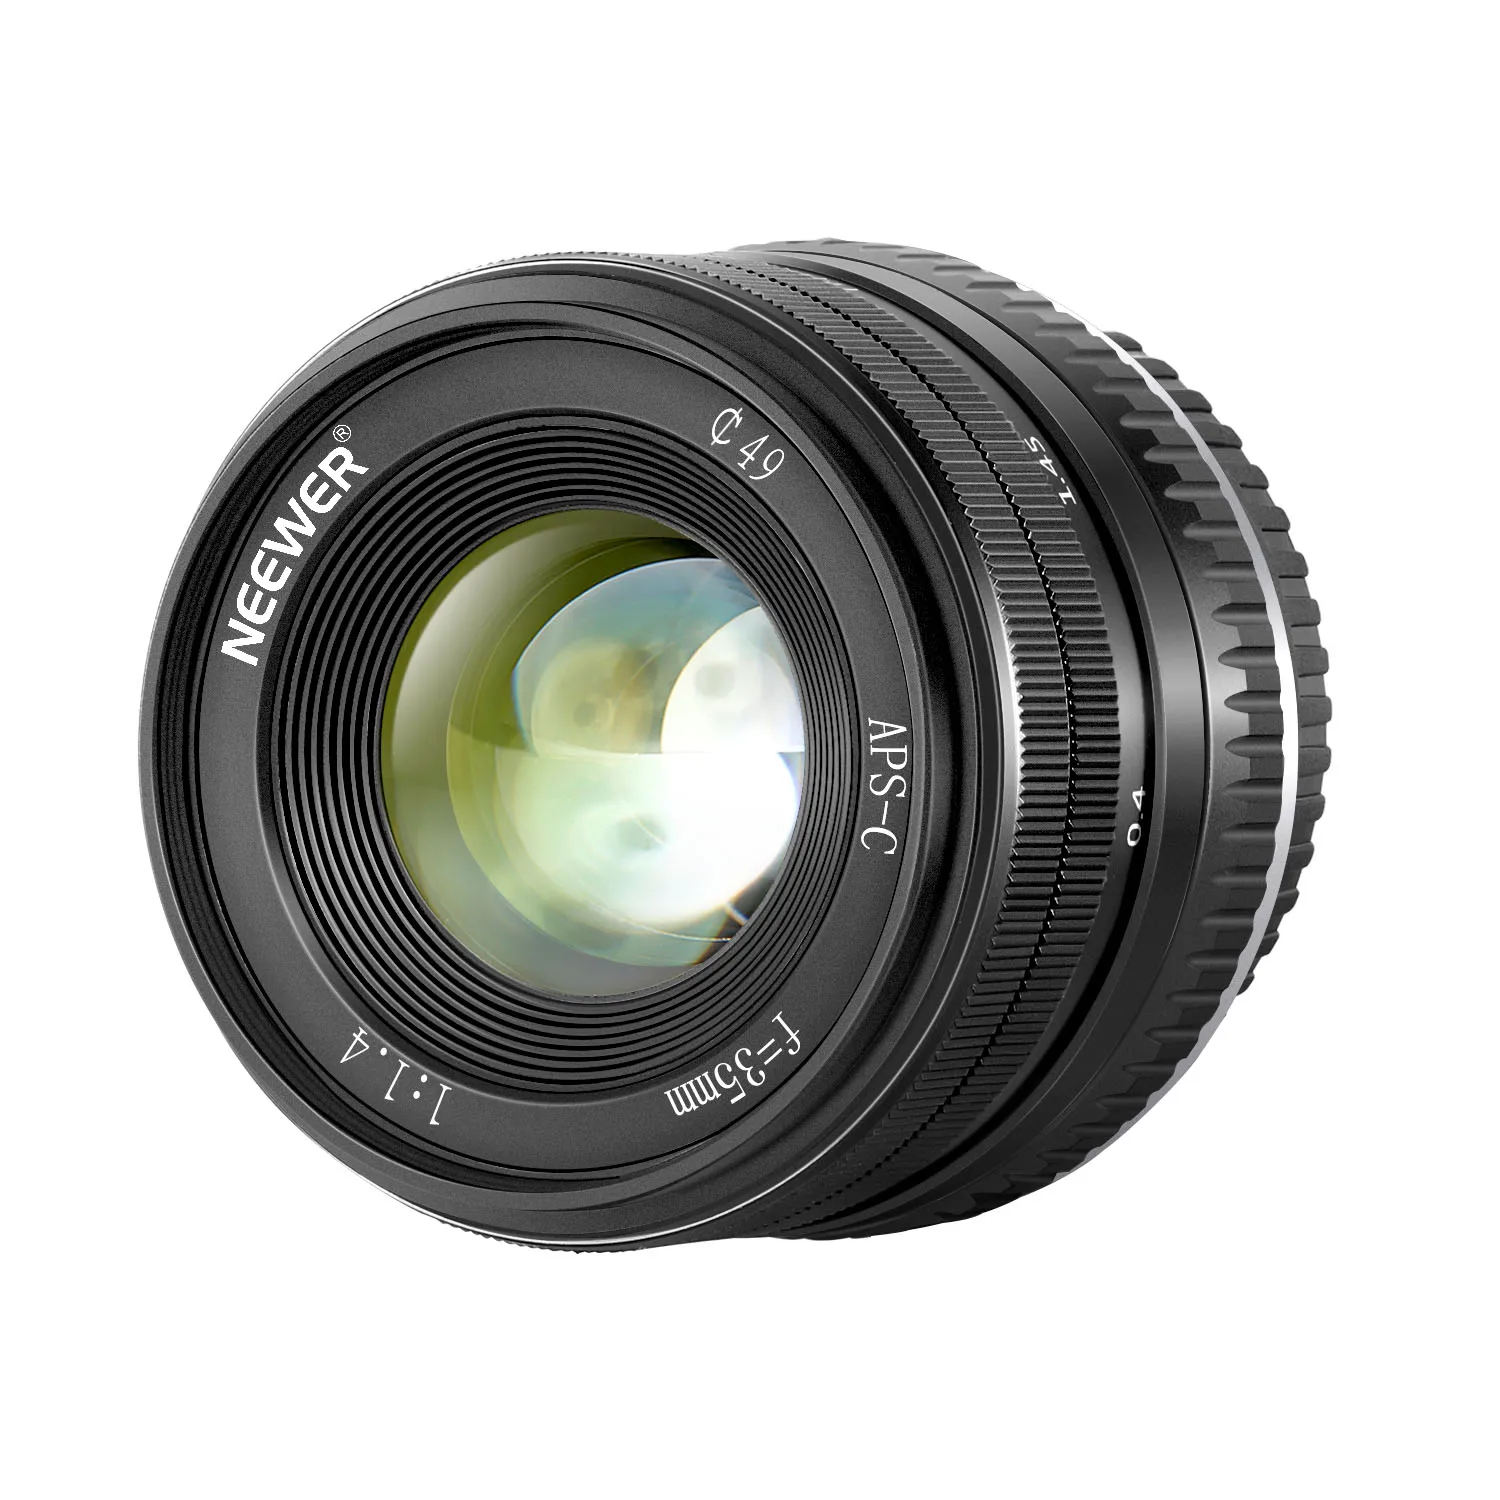 

Neewer 35mm F1.4 Large Aperture Prime APS-C Aluminum Lens Compatible with Fuji X Mount Mirrorless Cameras X-A1 X-A10 X-A2 X-A3 X